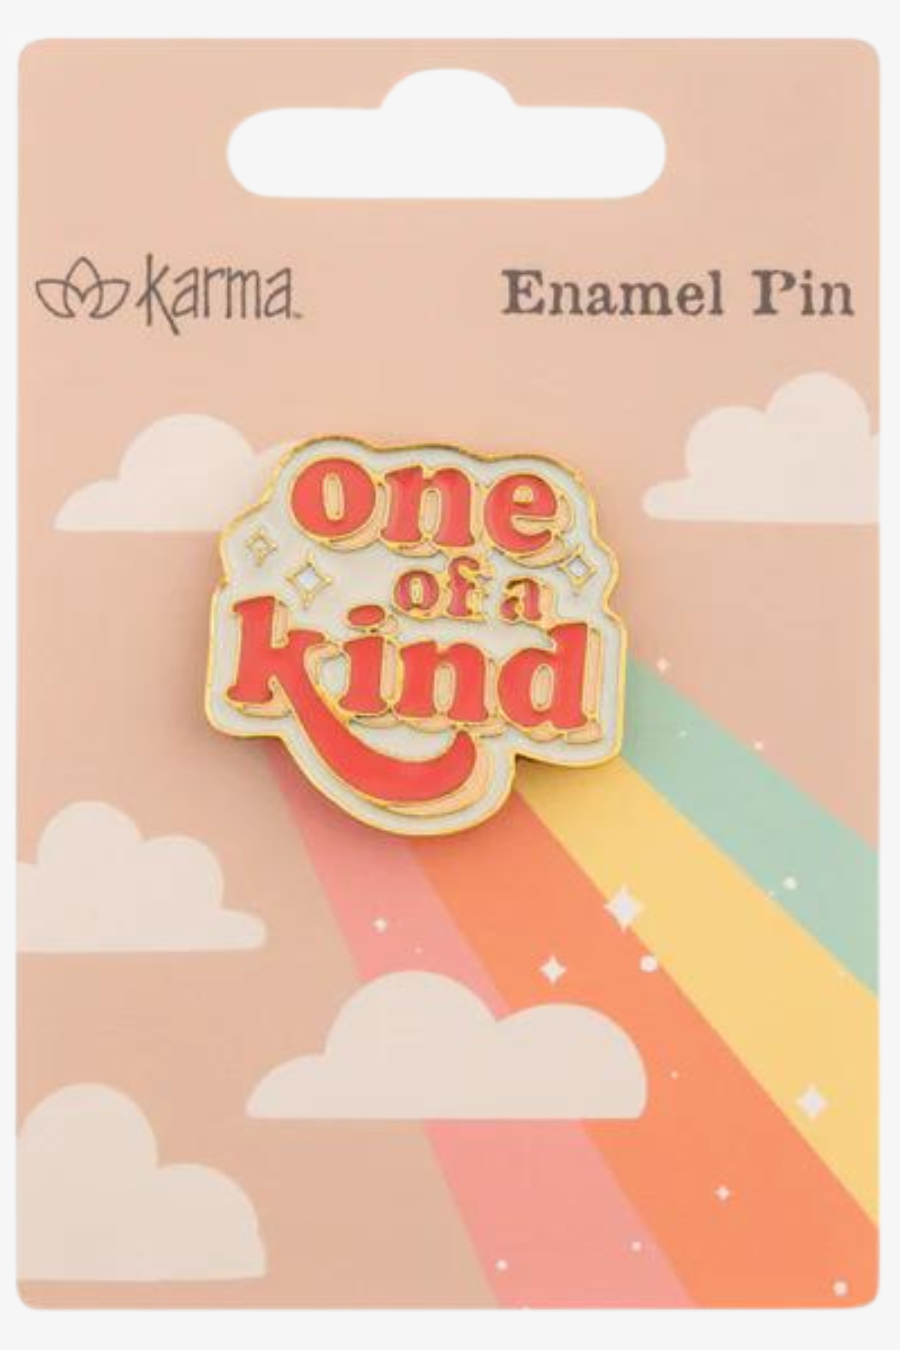 "One of a Kind" Enamel Pin